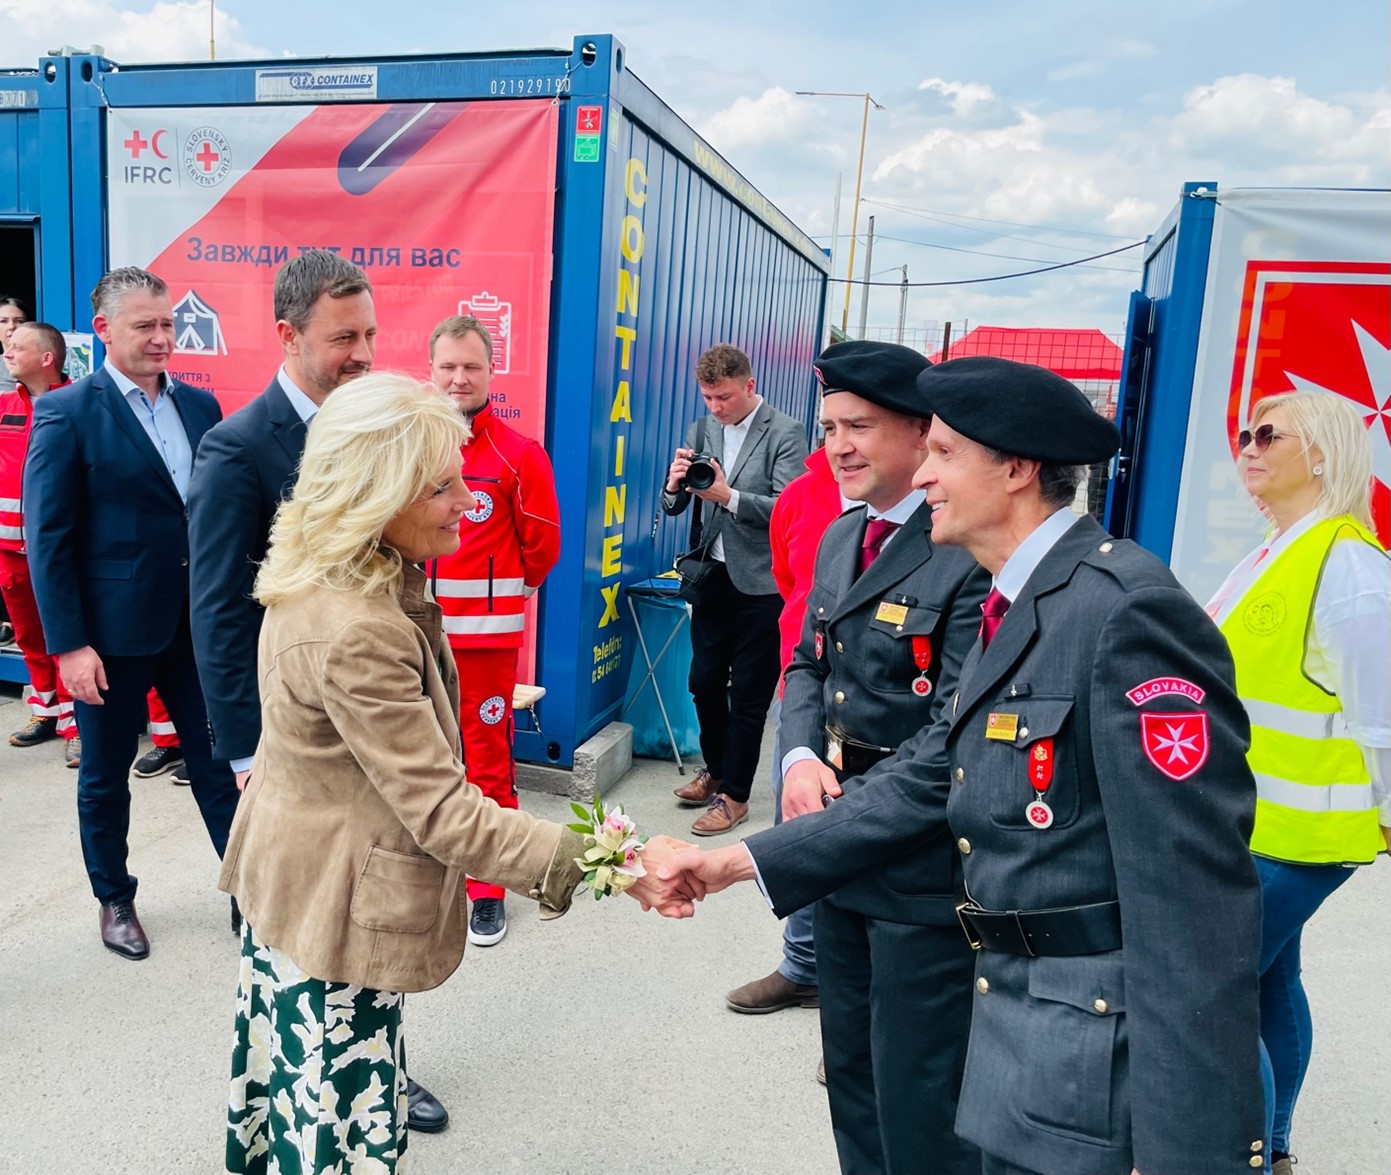 US First Lady Jill Biden meets with Order of Malta volunteers during her visit to the Slovak-Ukrainian border